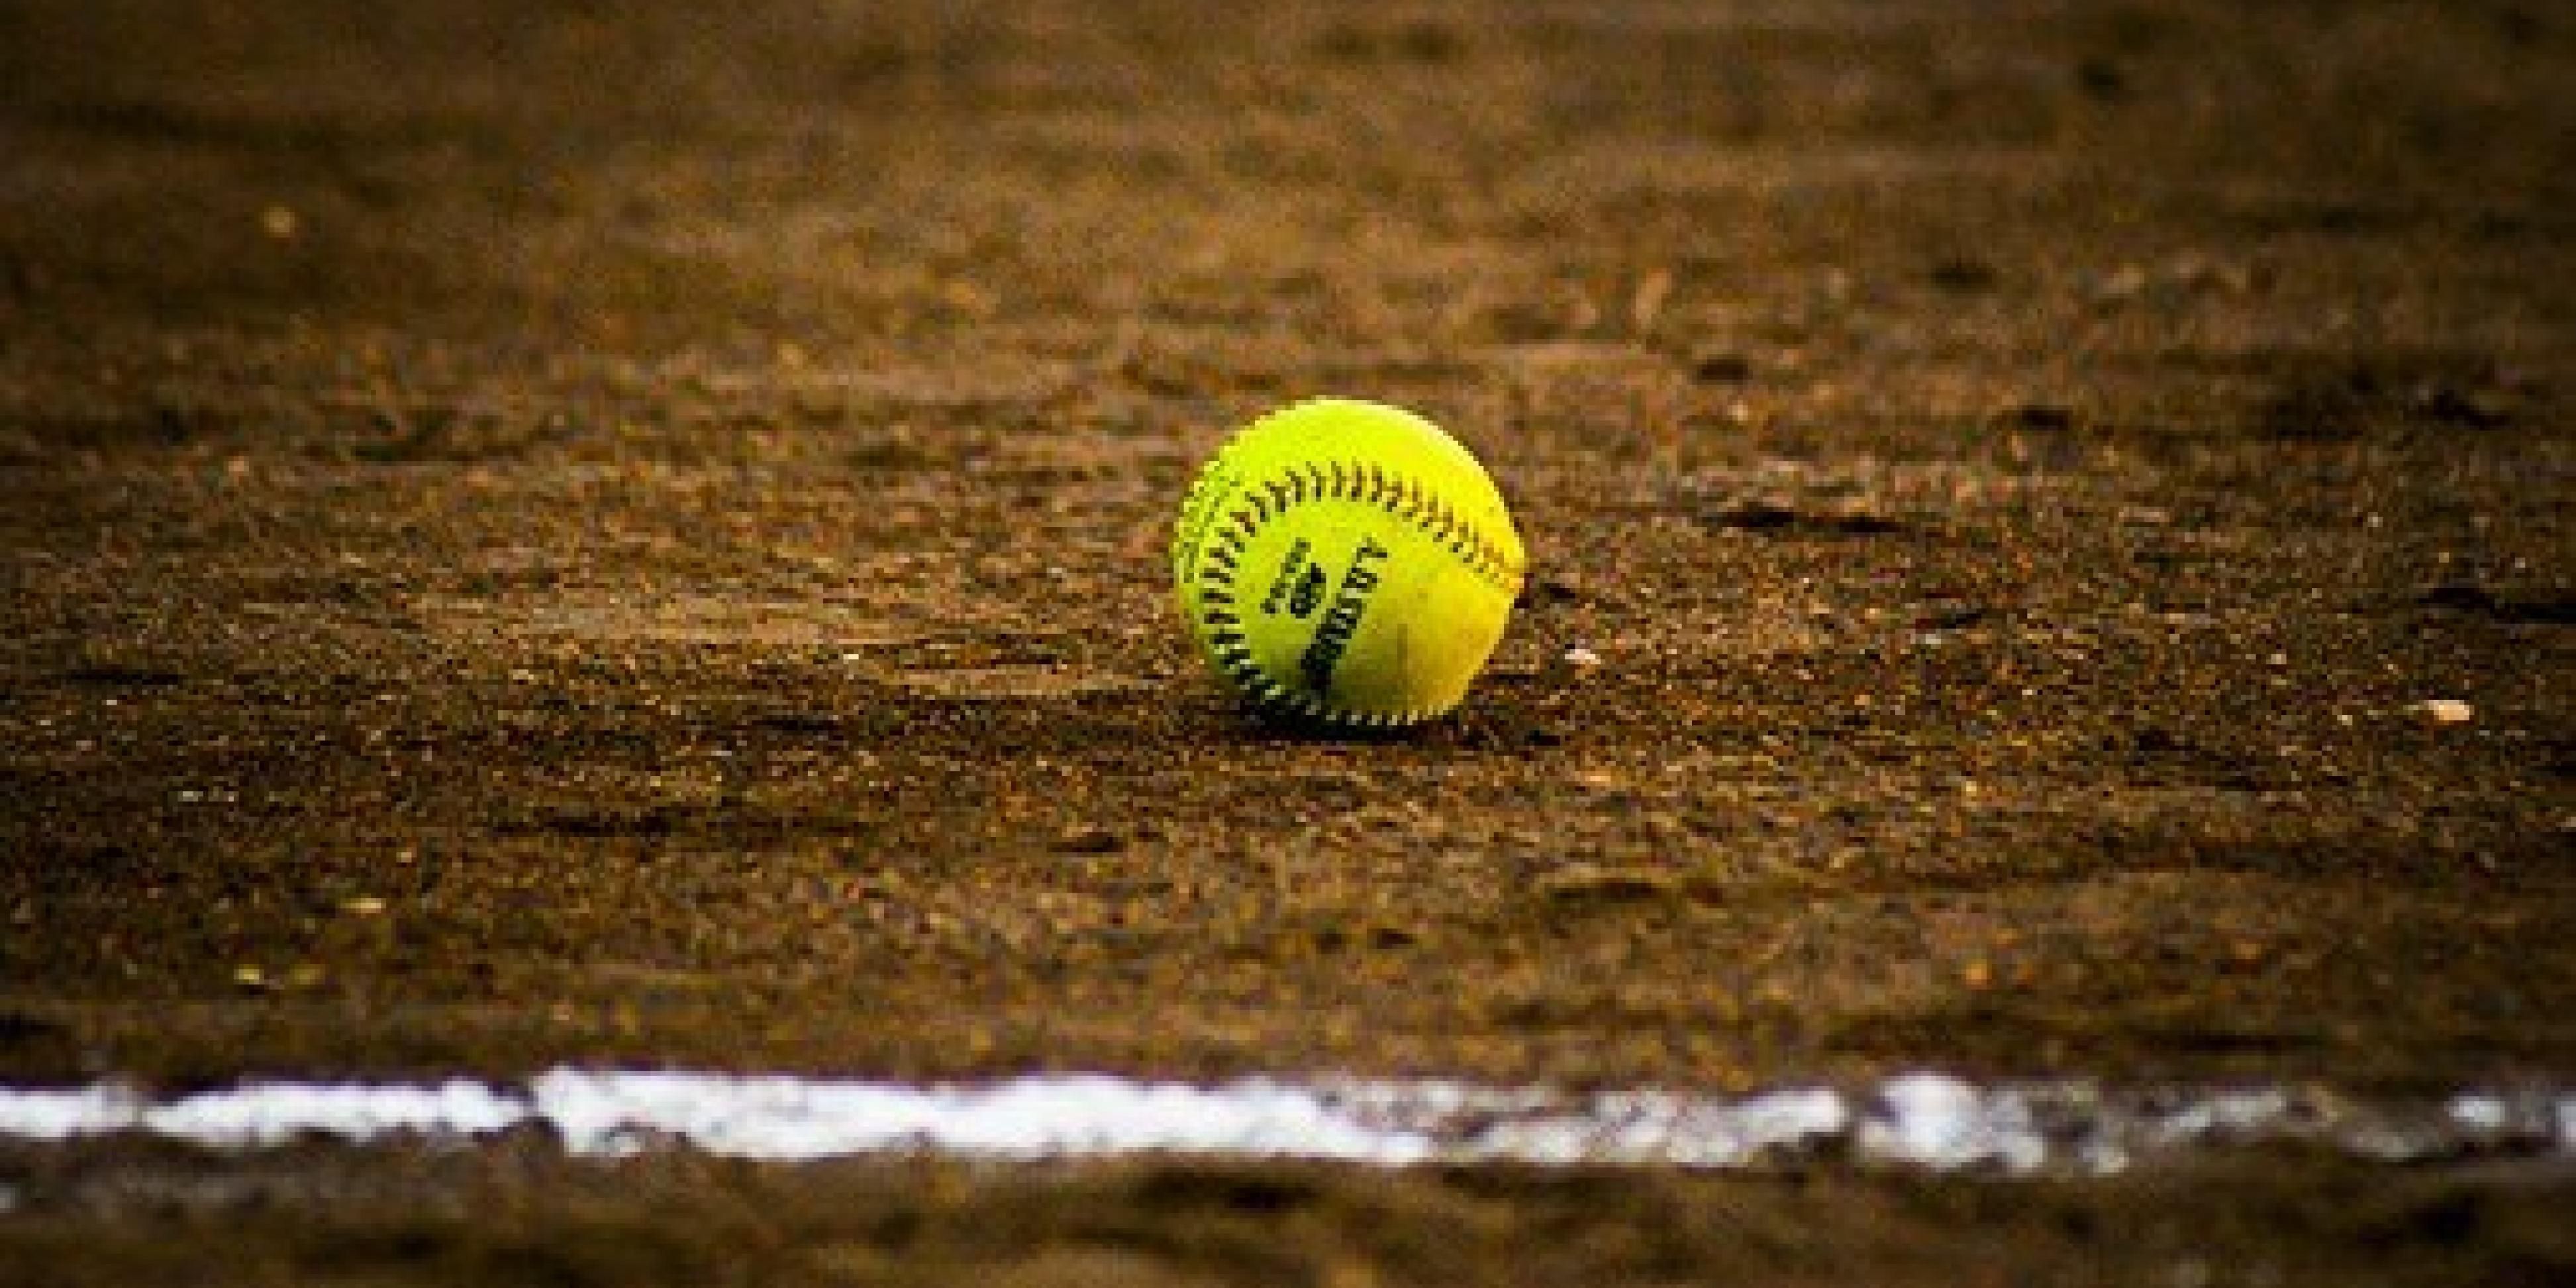 Did someone say softball? The Holiday Inn Express Columbus Downtown is located just under 2 miles away from Lou Berliner Sports Park. Did you know that Lou Berliner Sports Park is the nation's largest ball diamond complex?  